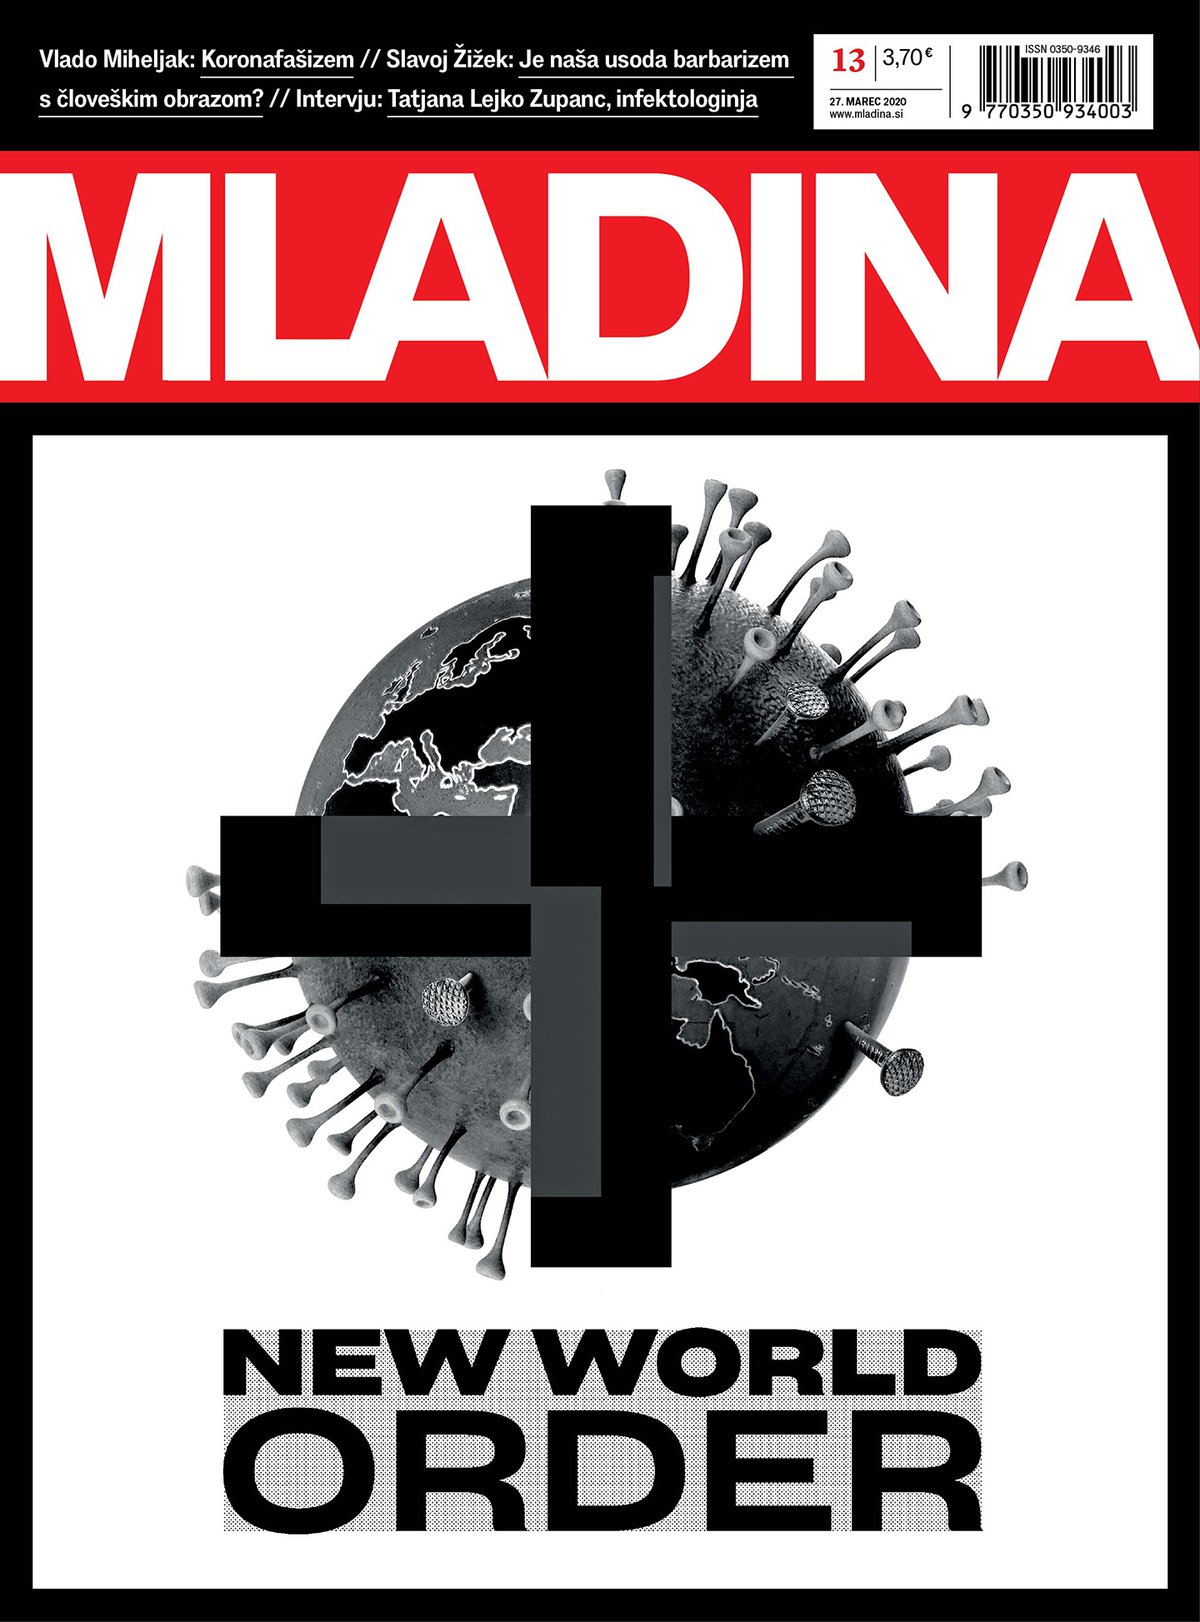 Cover of Mladina weekly, 27 March 2020